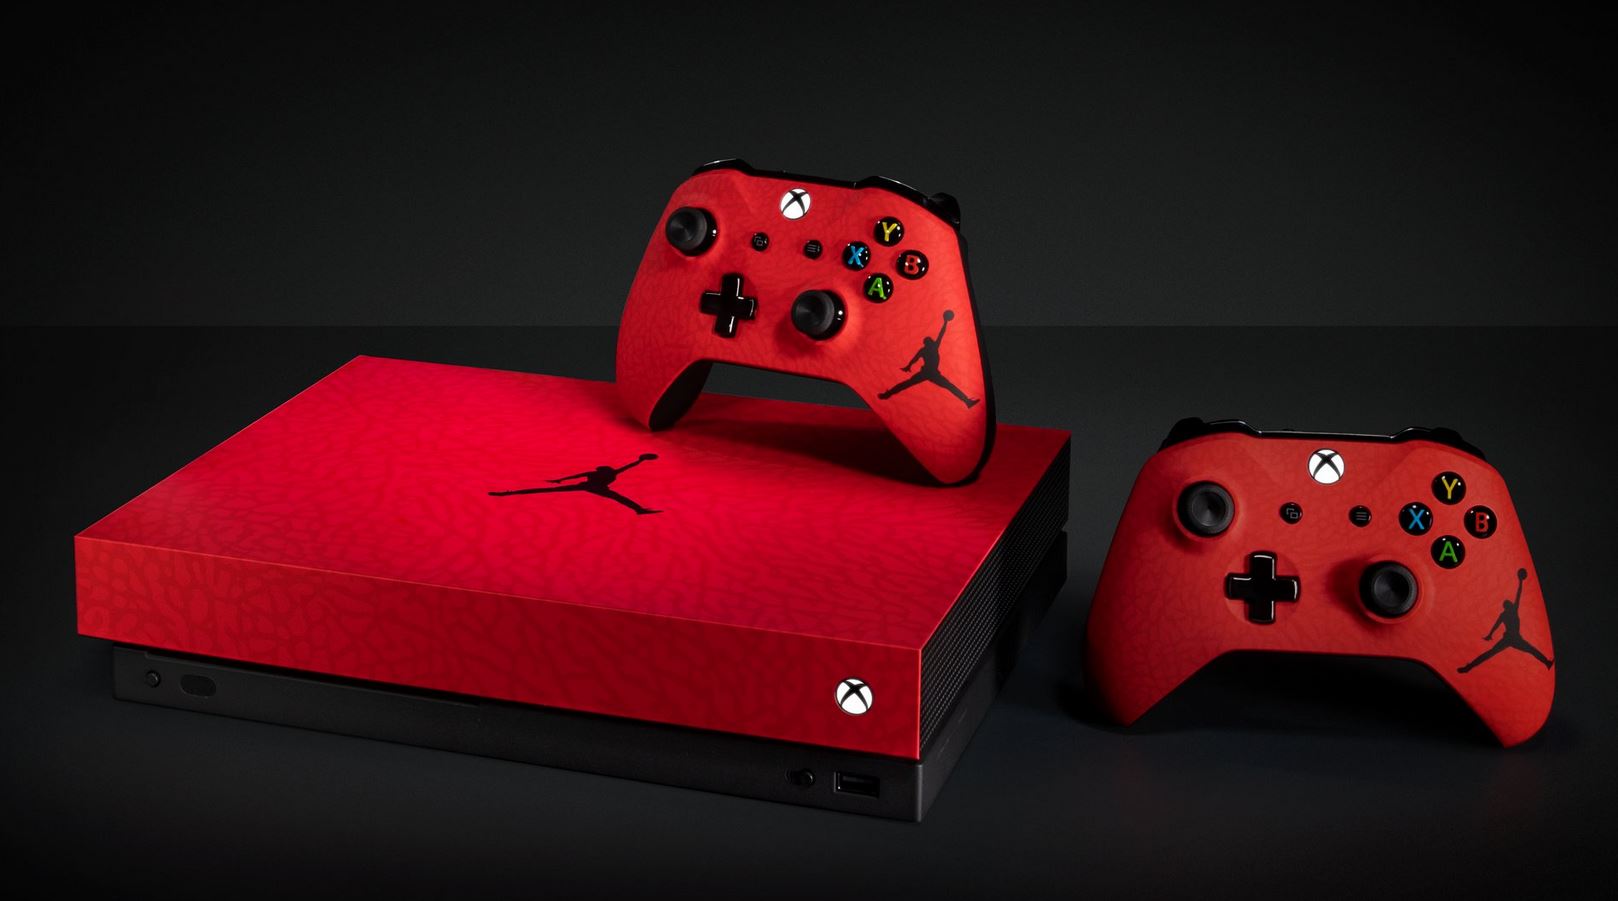 Jordan Brand Xbox One X is very red and 